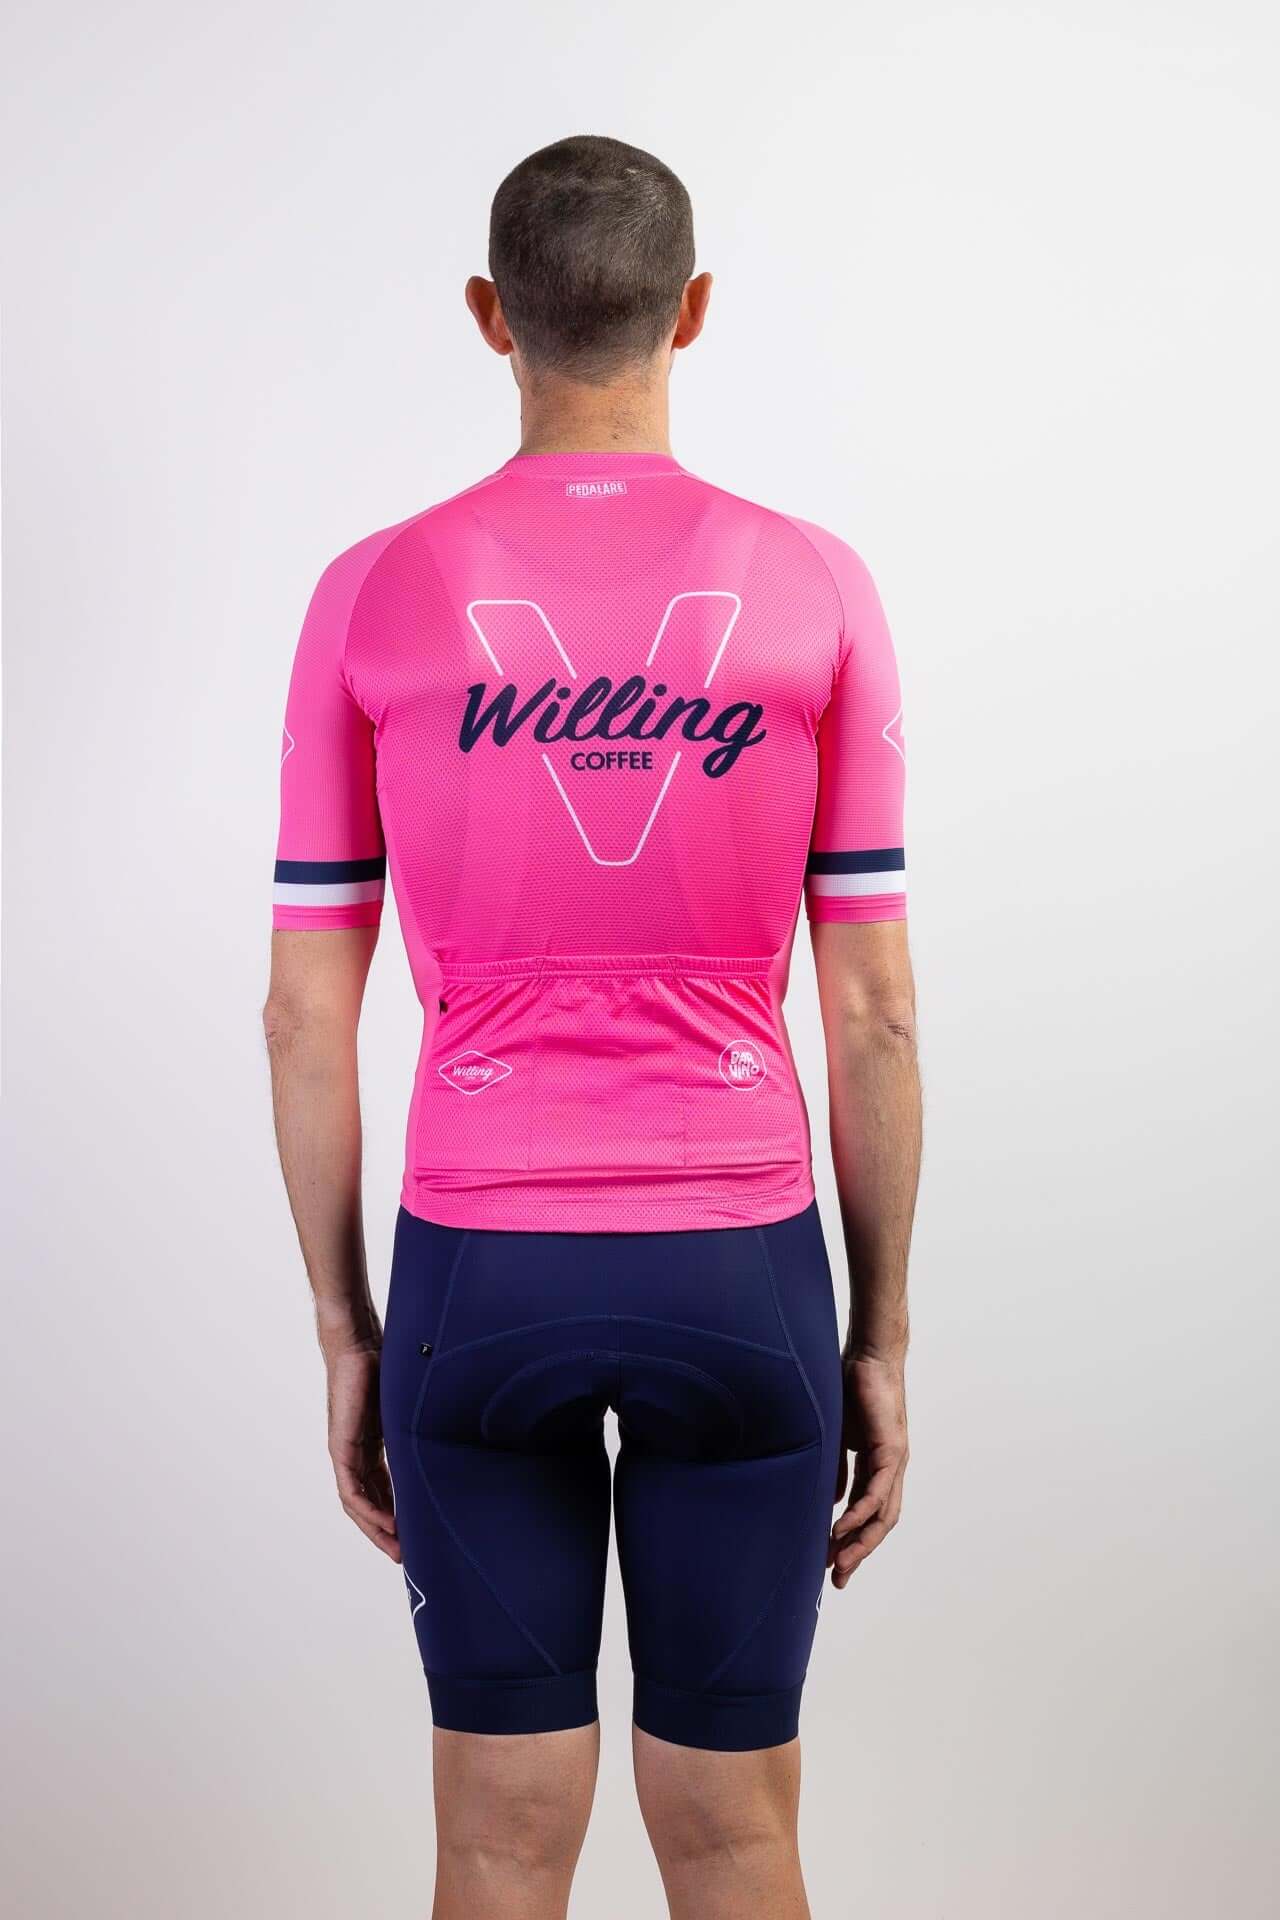 Men's Willing Coffee 5th Anniversary Pink Cycling Jersey - Celebrate in style with this high-performance fabric jersey. Stay comfortable and stylish on every ride! 